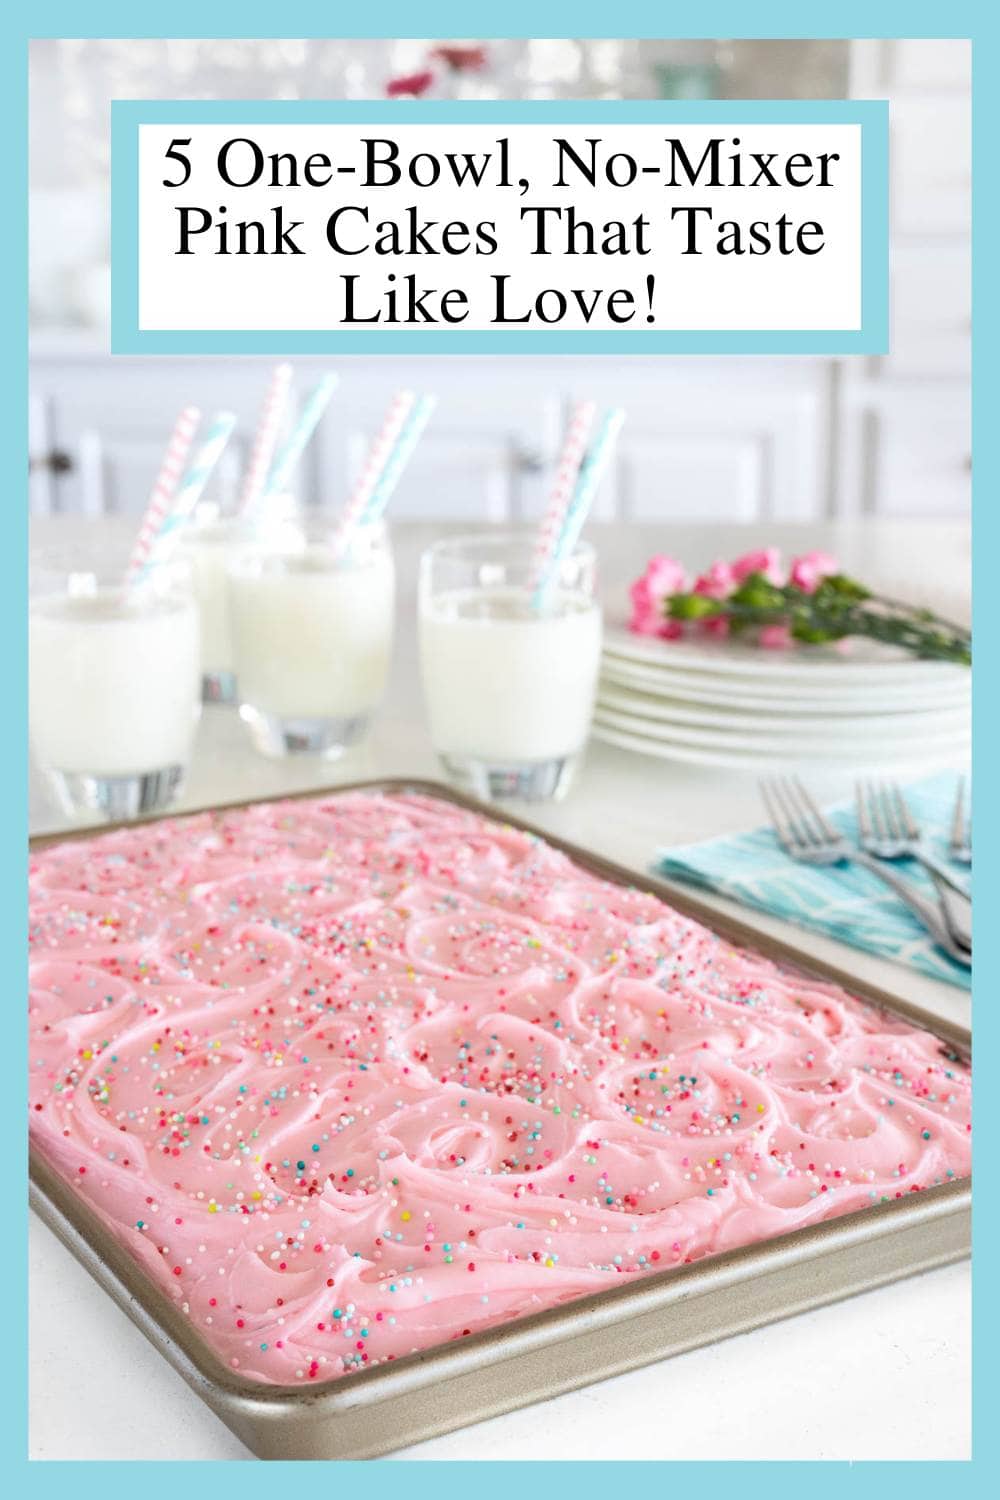 5 One-Bowl, No-Mixer Pink Cakes That Taste Like Love!